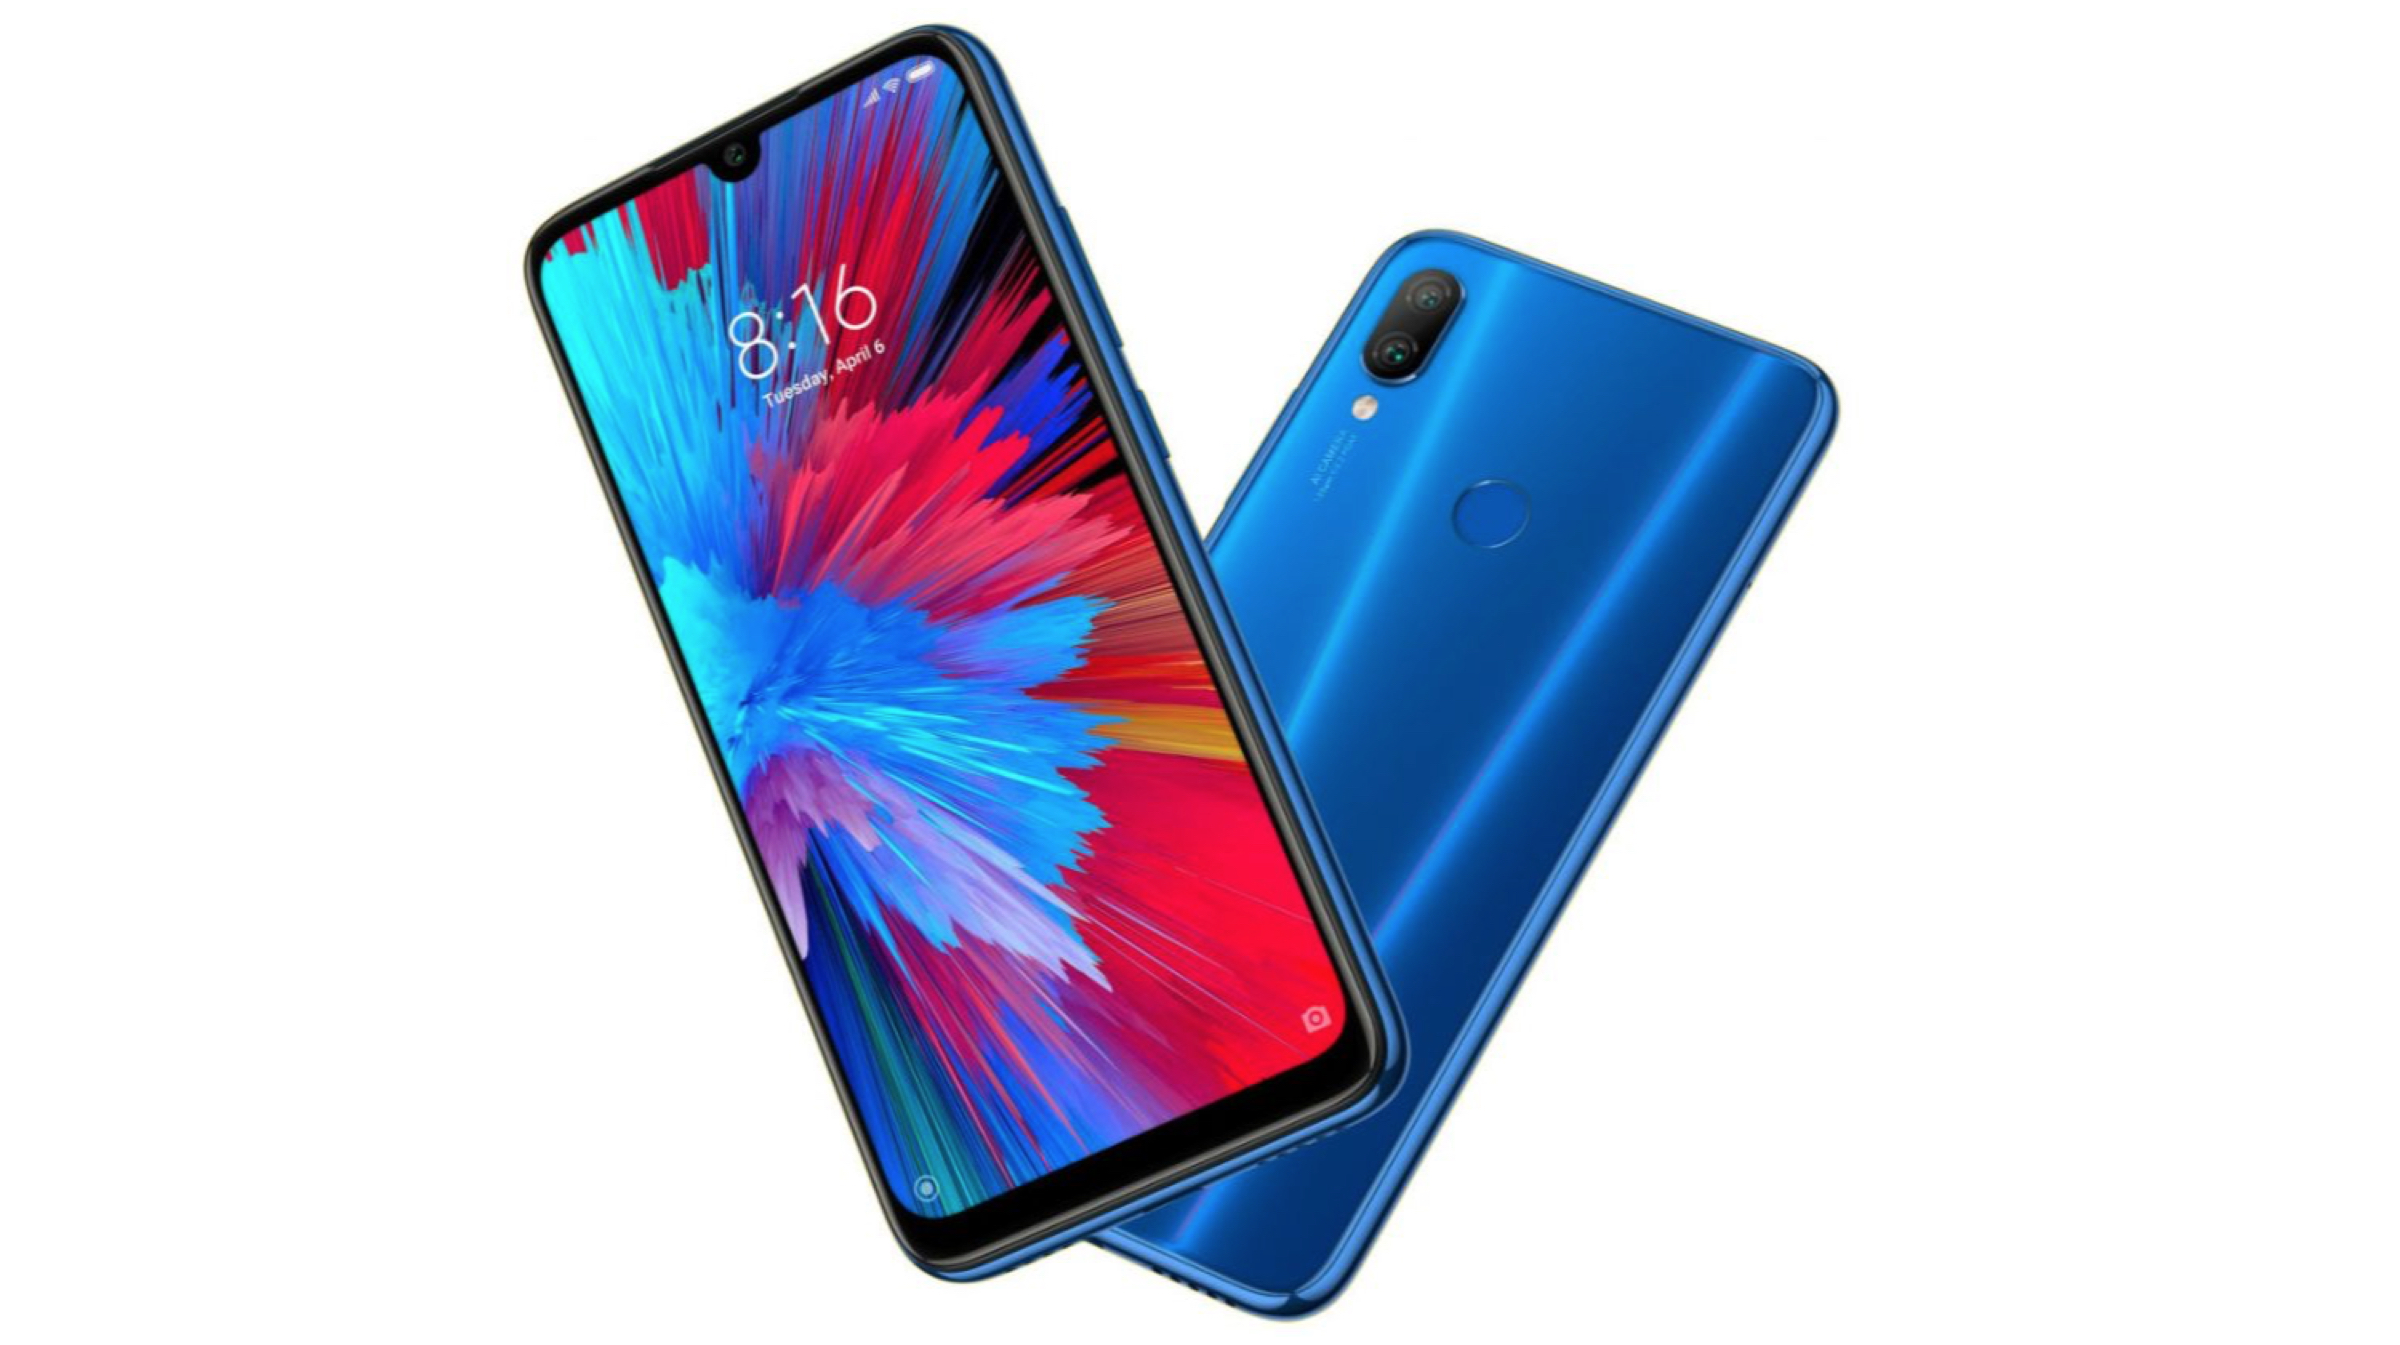 Redmi Note 7 Launched In India, Price, Specs, Features ...